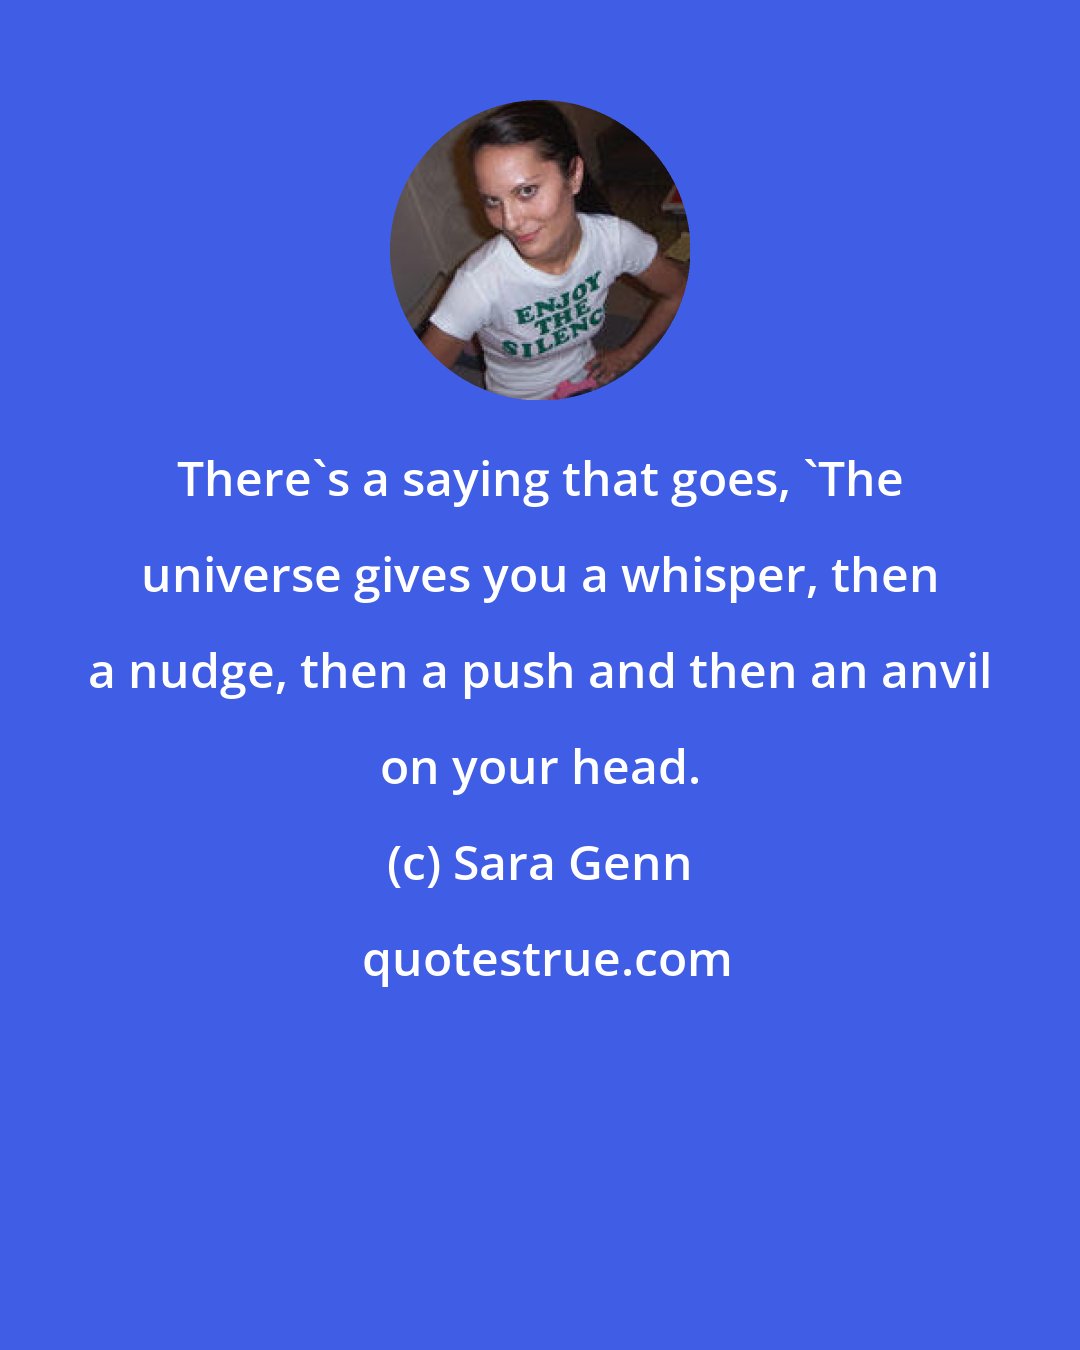 Sara Genn: There's a saying that goes, 'The universe gives you a whisper, then a nudge, then a push and then an anvil on your head.